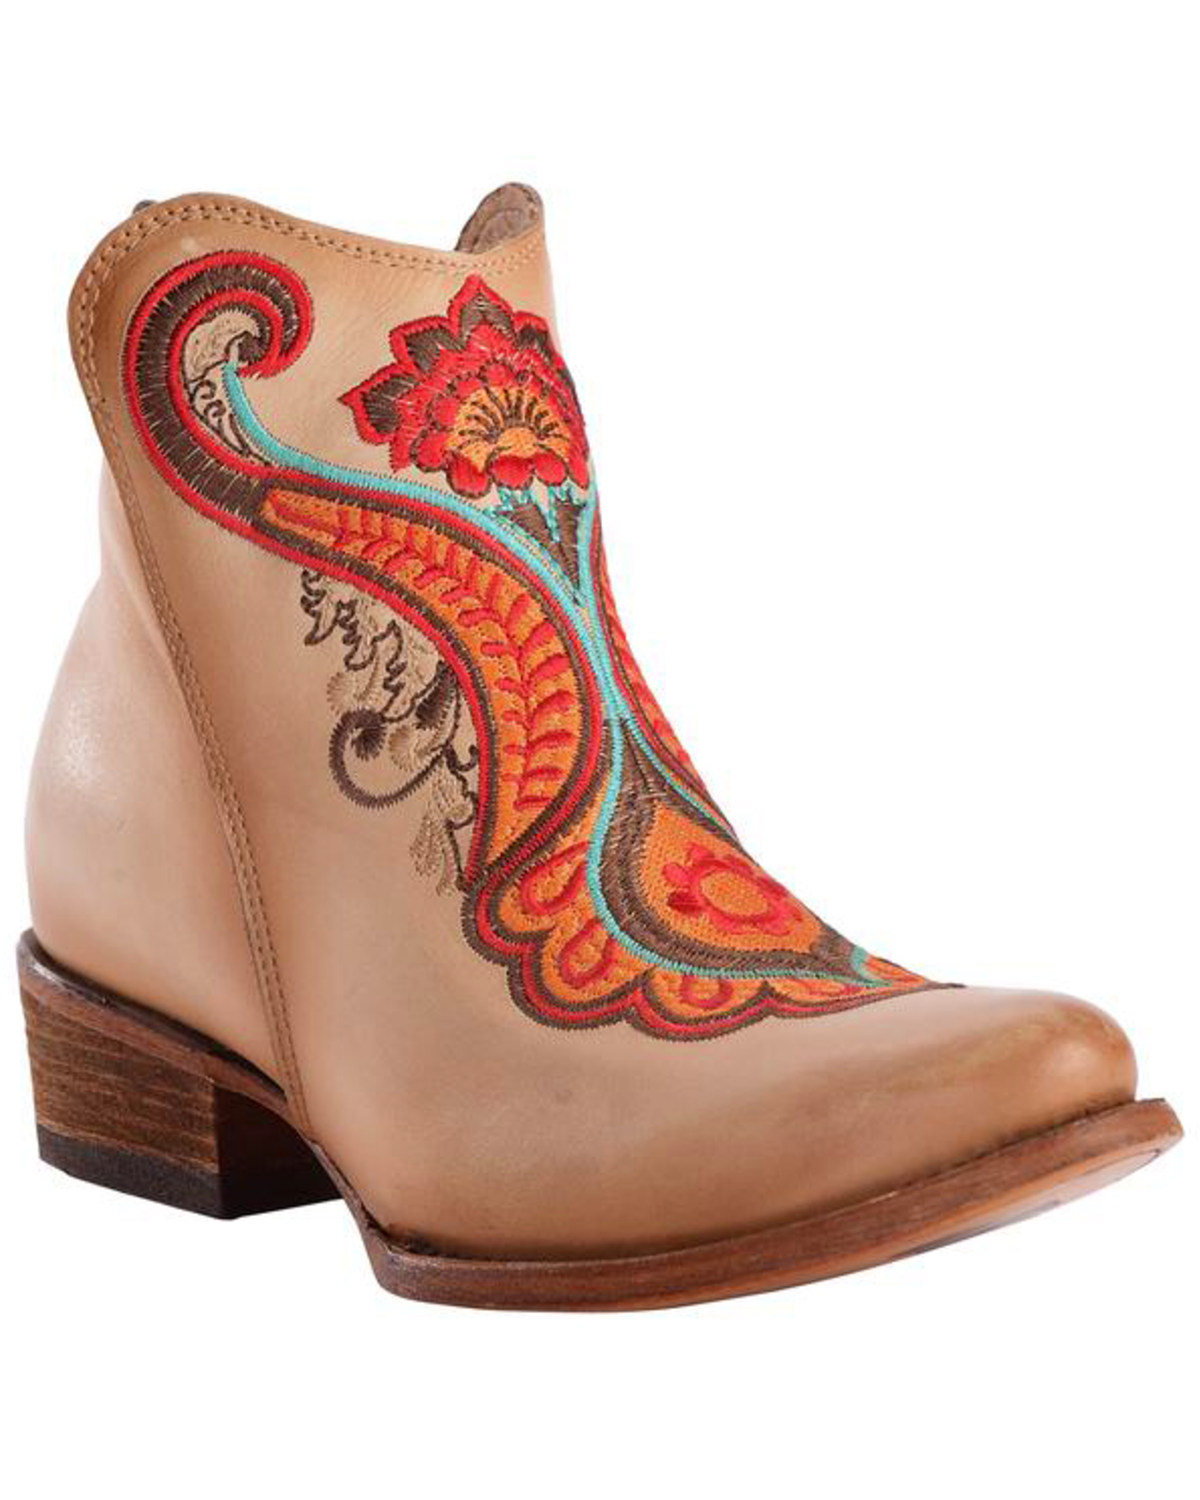 CORRAL Women's Natural Orange Embroidered Booties C3269 